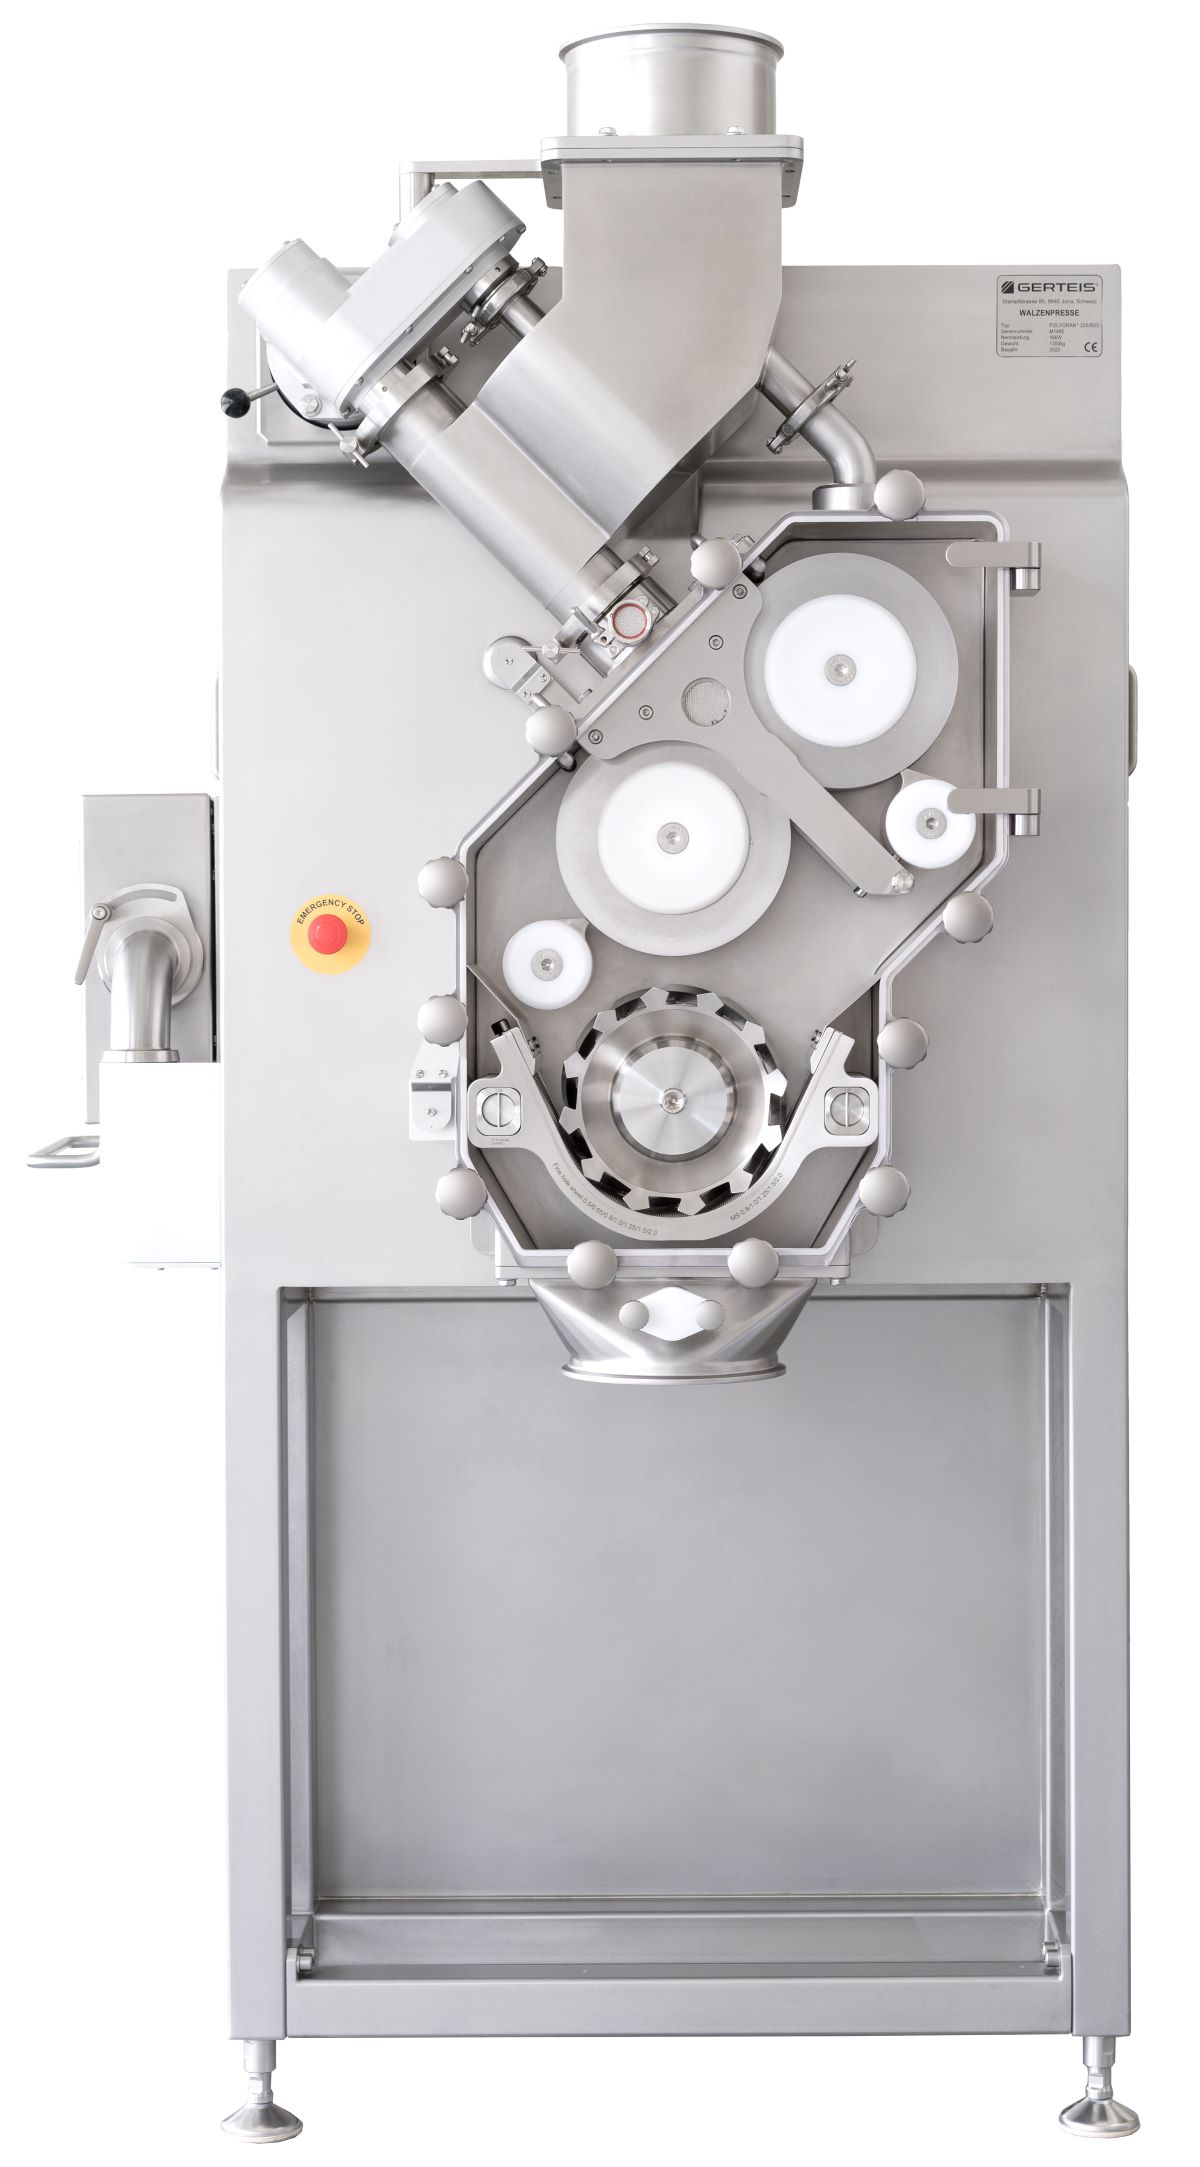 Gerteis® brings advanced dry granulation roller compaction to COPHEX 2023